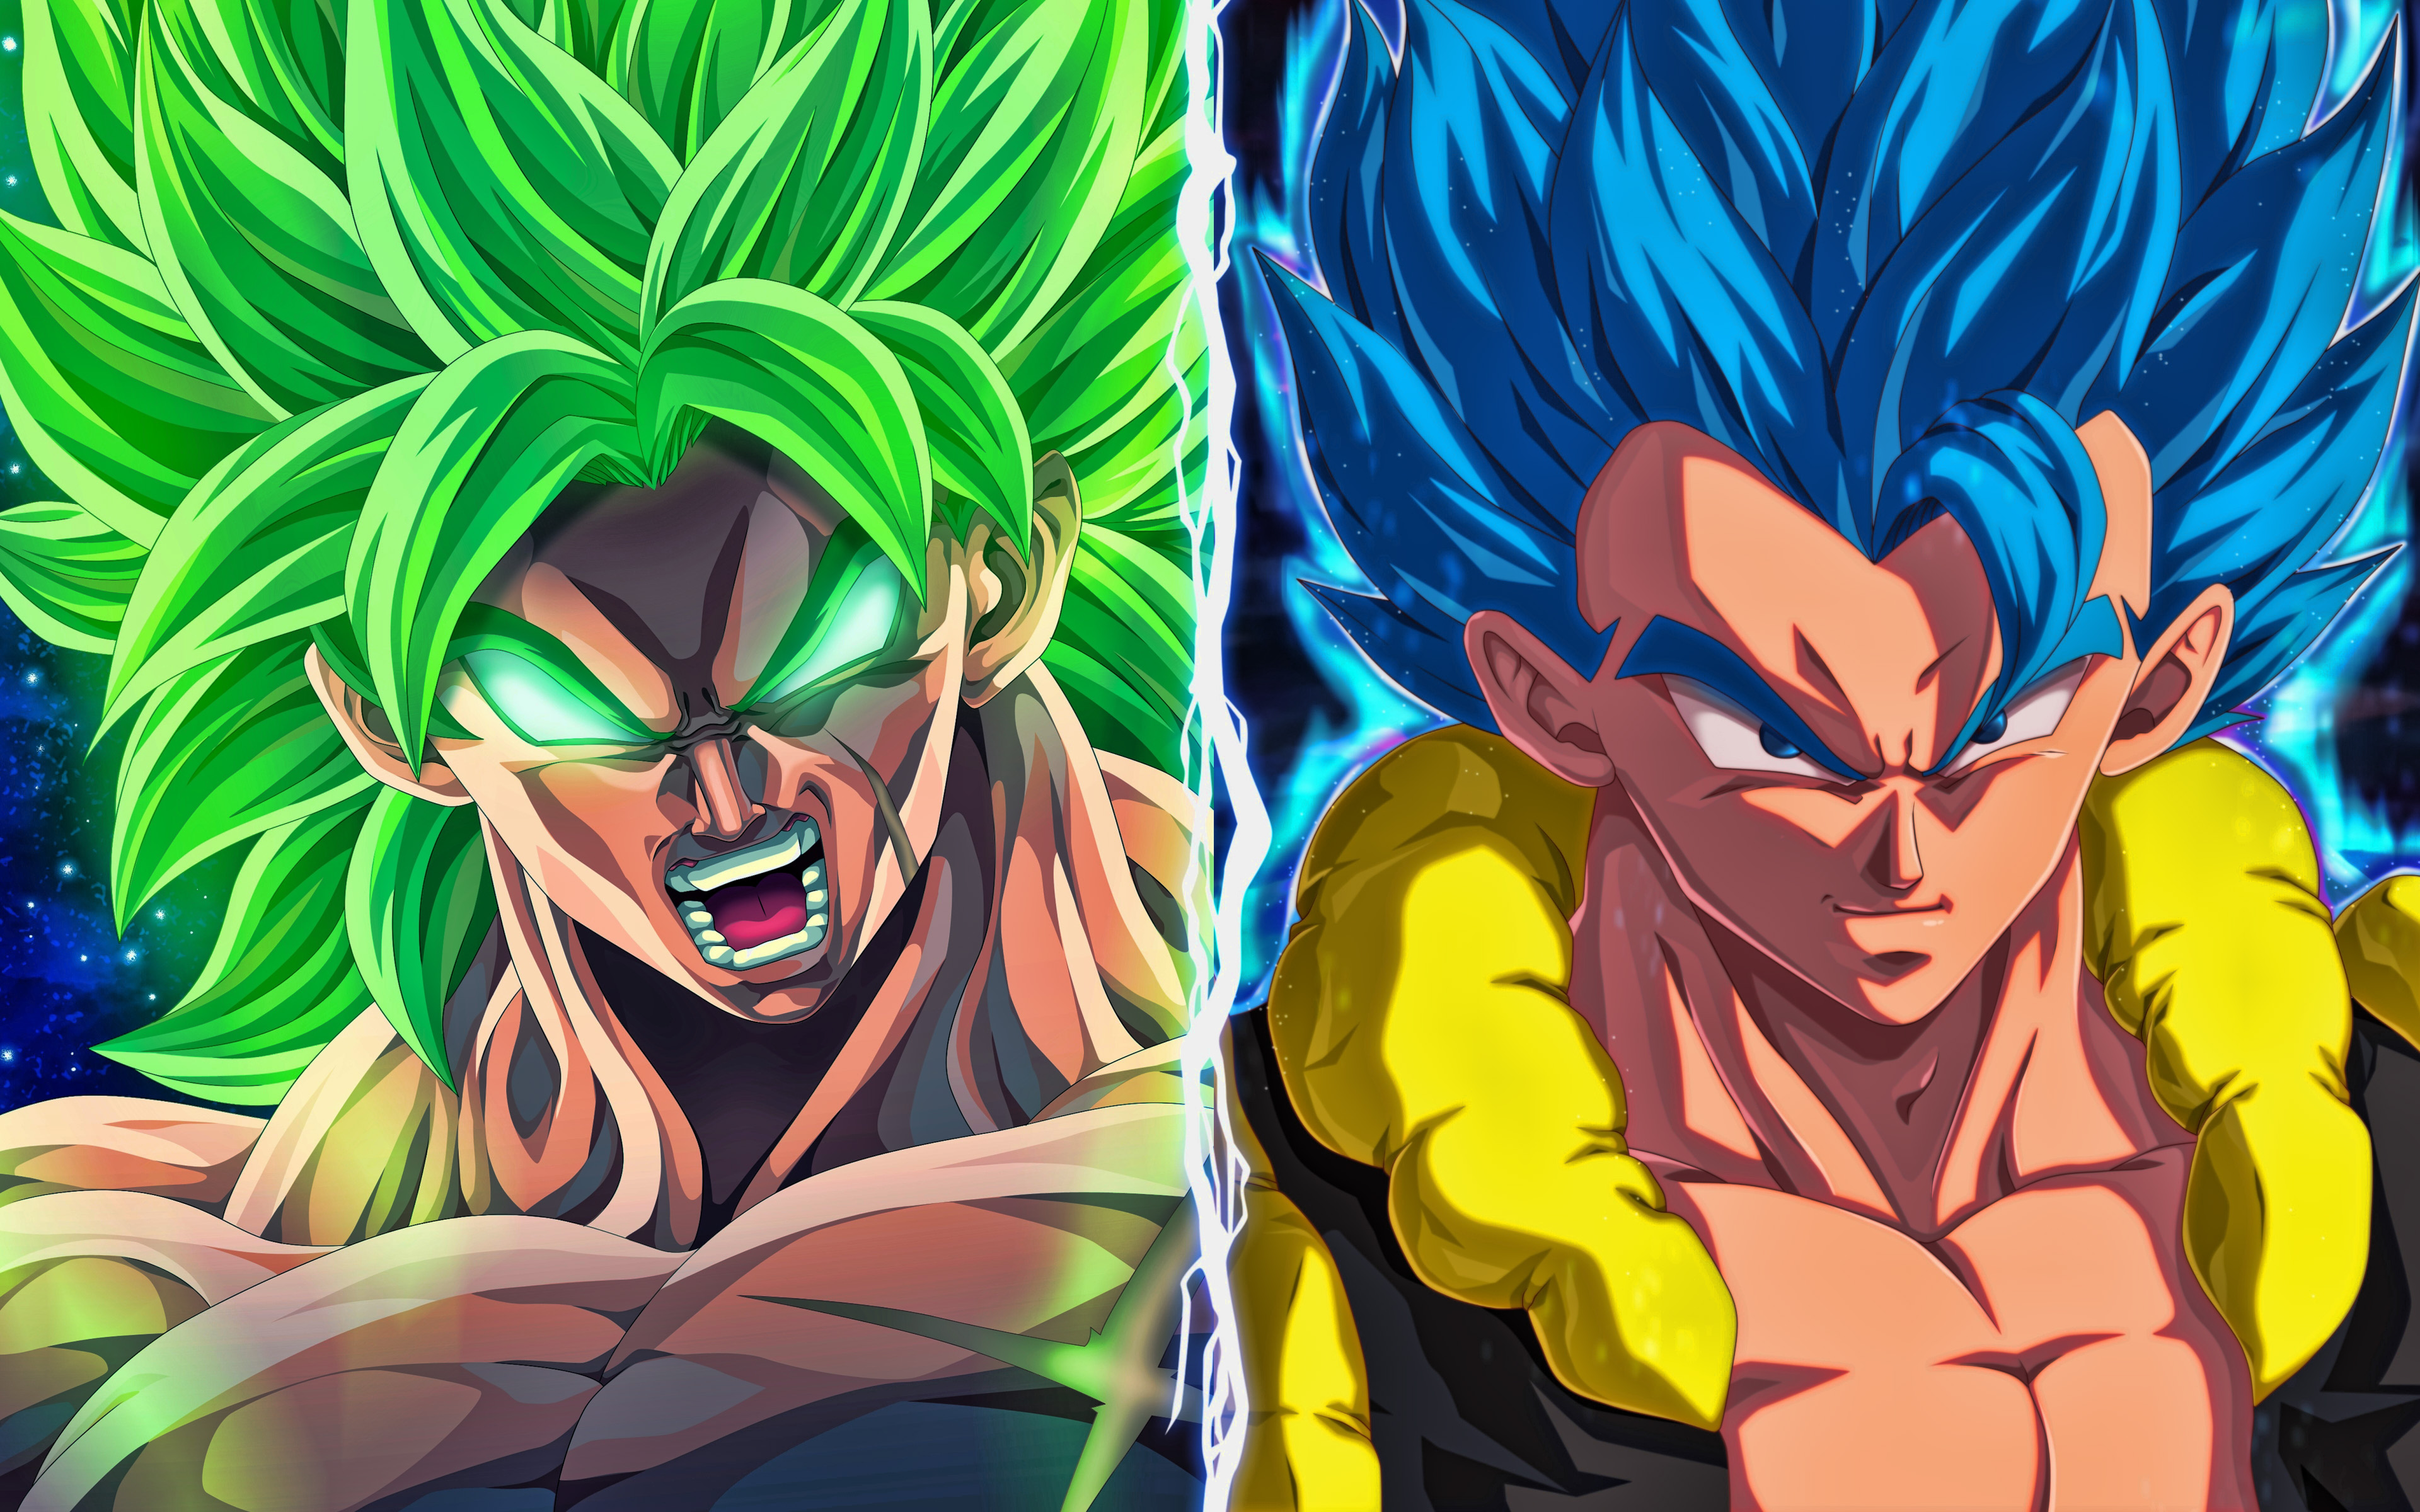 Download wallpaper Broly vs Gogeta, 4k, Dragon Ball, fan art, DBS, Dragon Ball Super, Broly, Gogeta, DBS characters, Broly DBS, Gogeta DBS for desktop with resolution 3840x2400. High Quality HD picture wallpaper